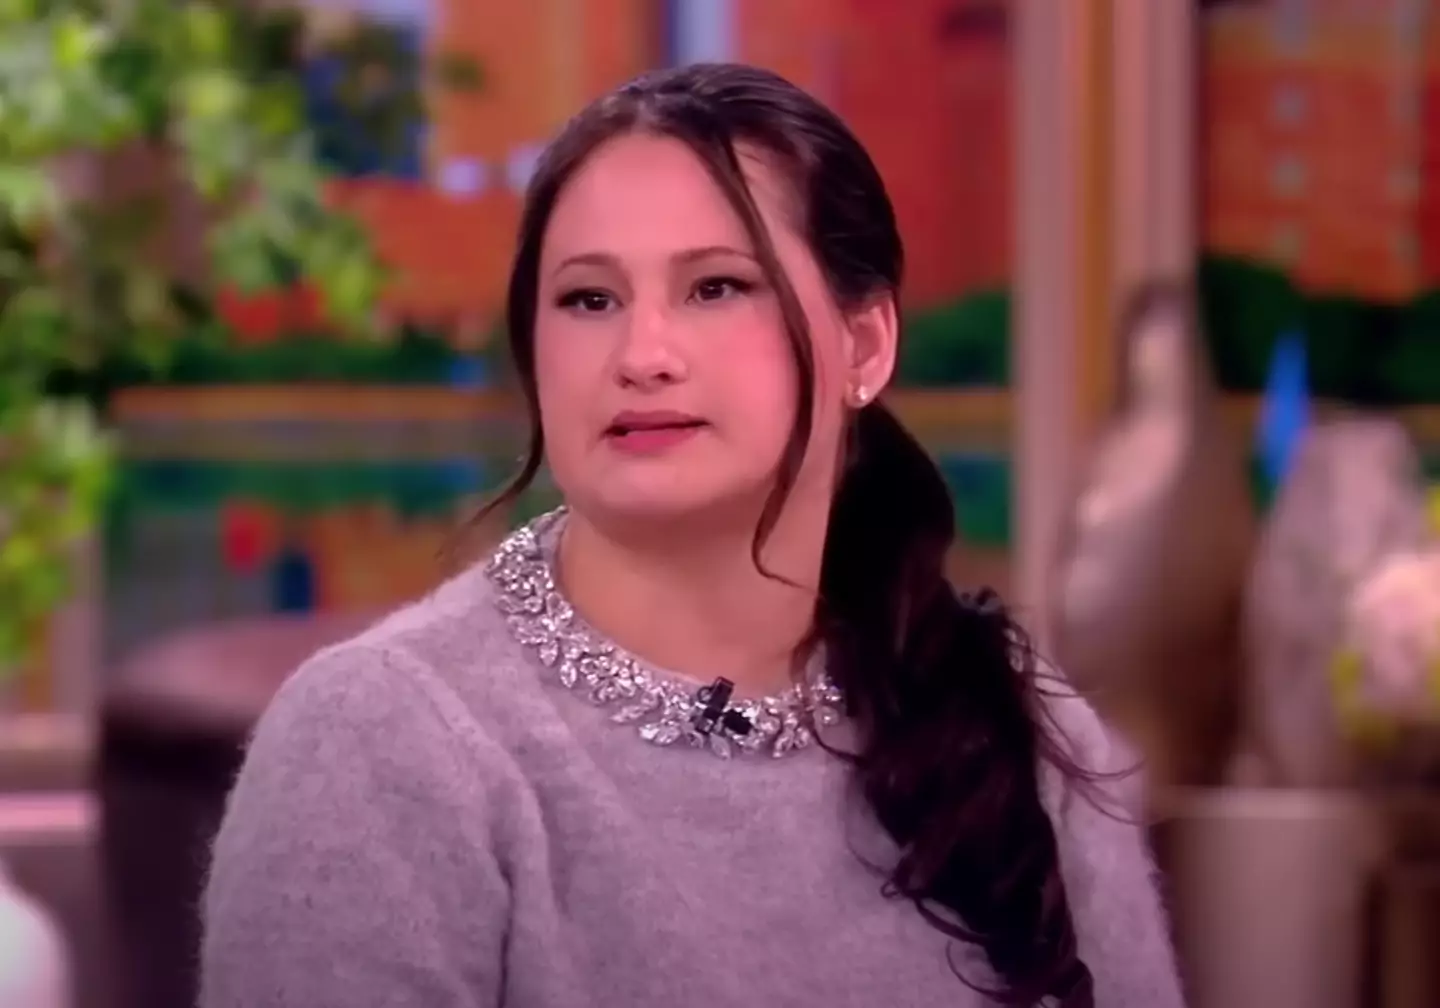 Gypsy Rose appeared on The View to speak about her life and new-found freedom.